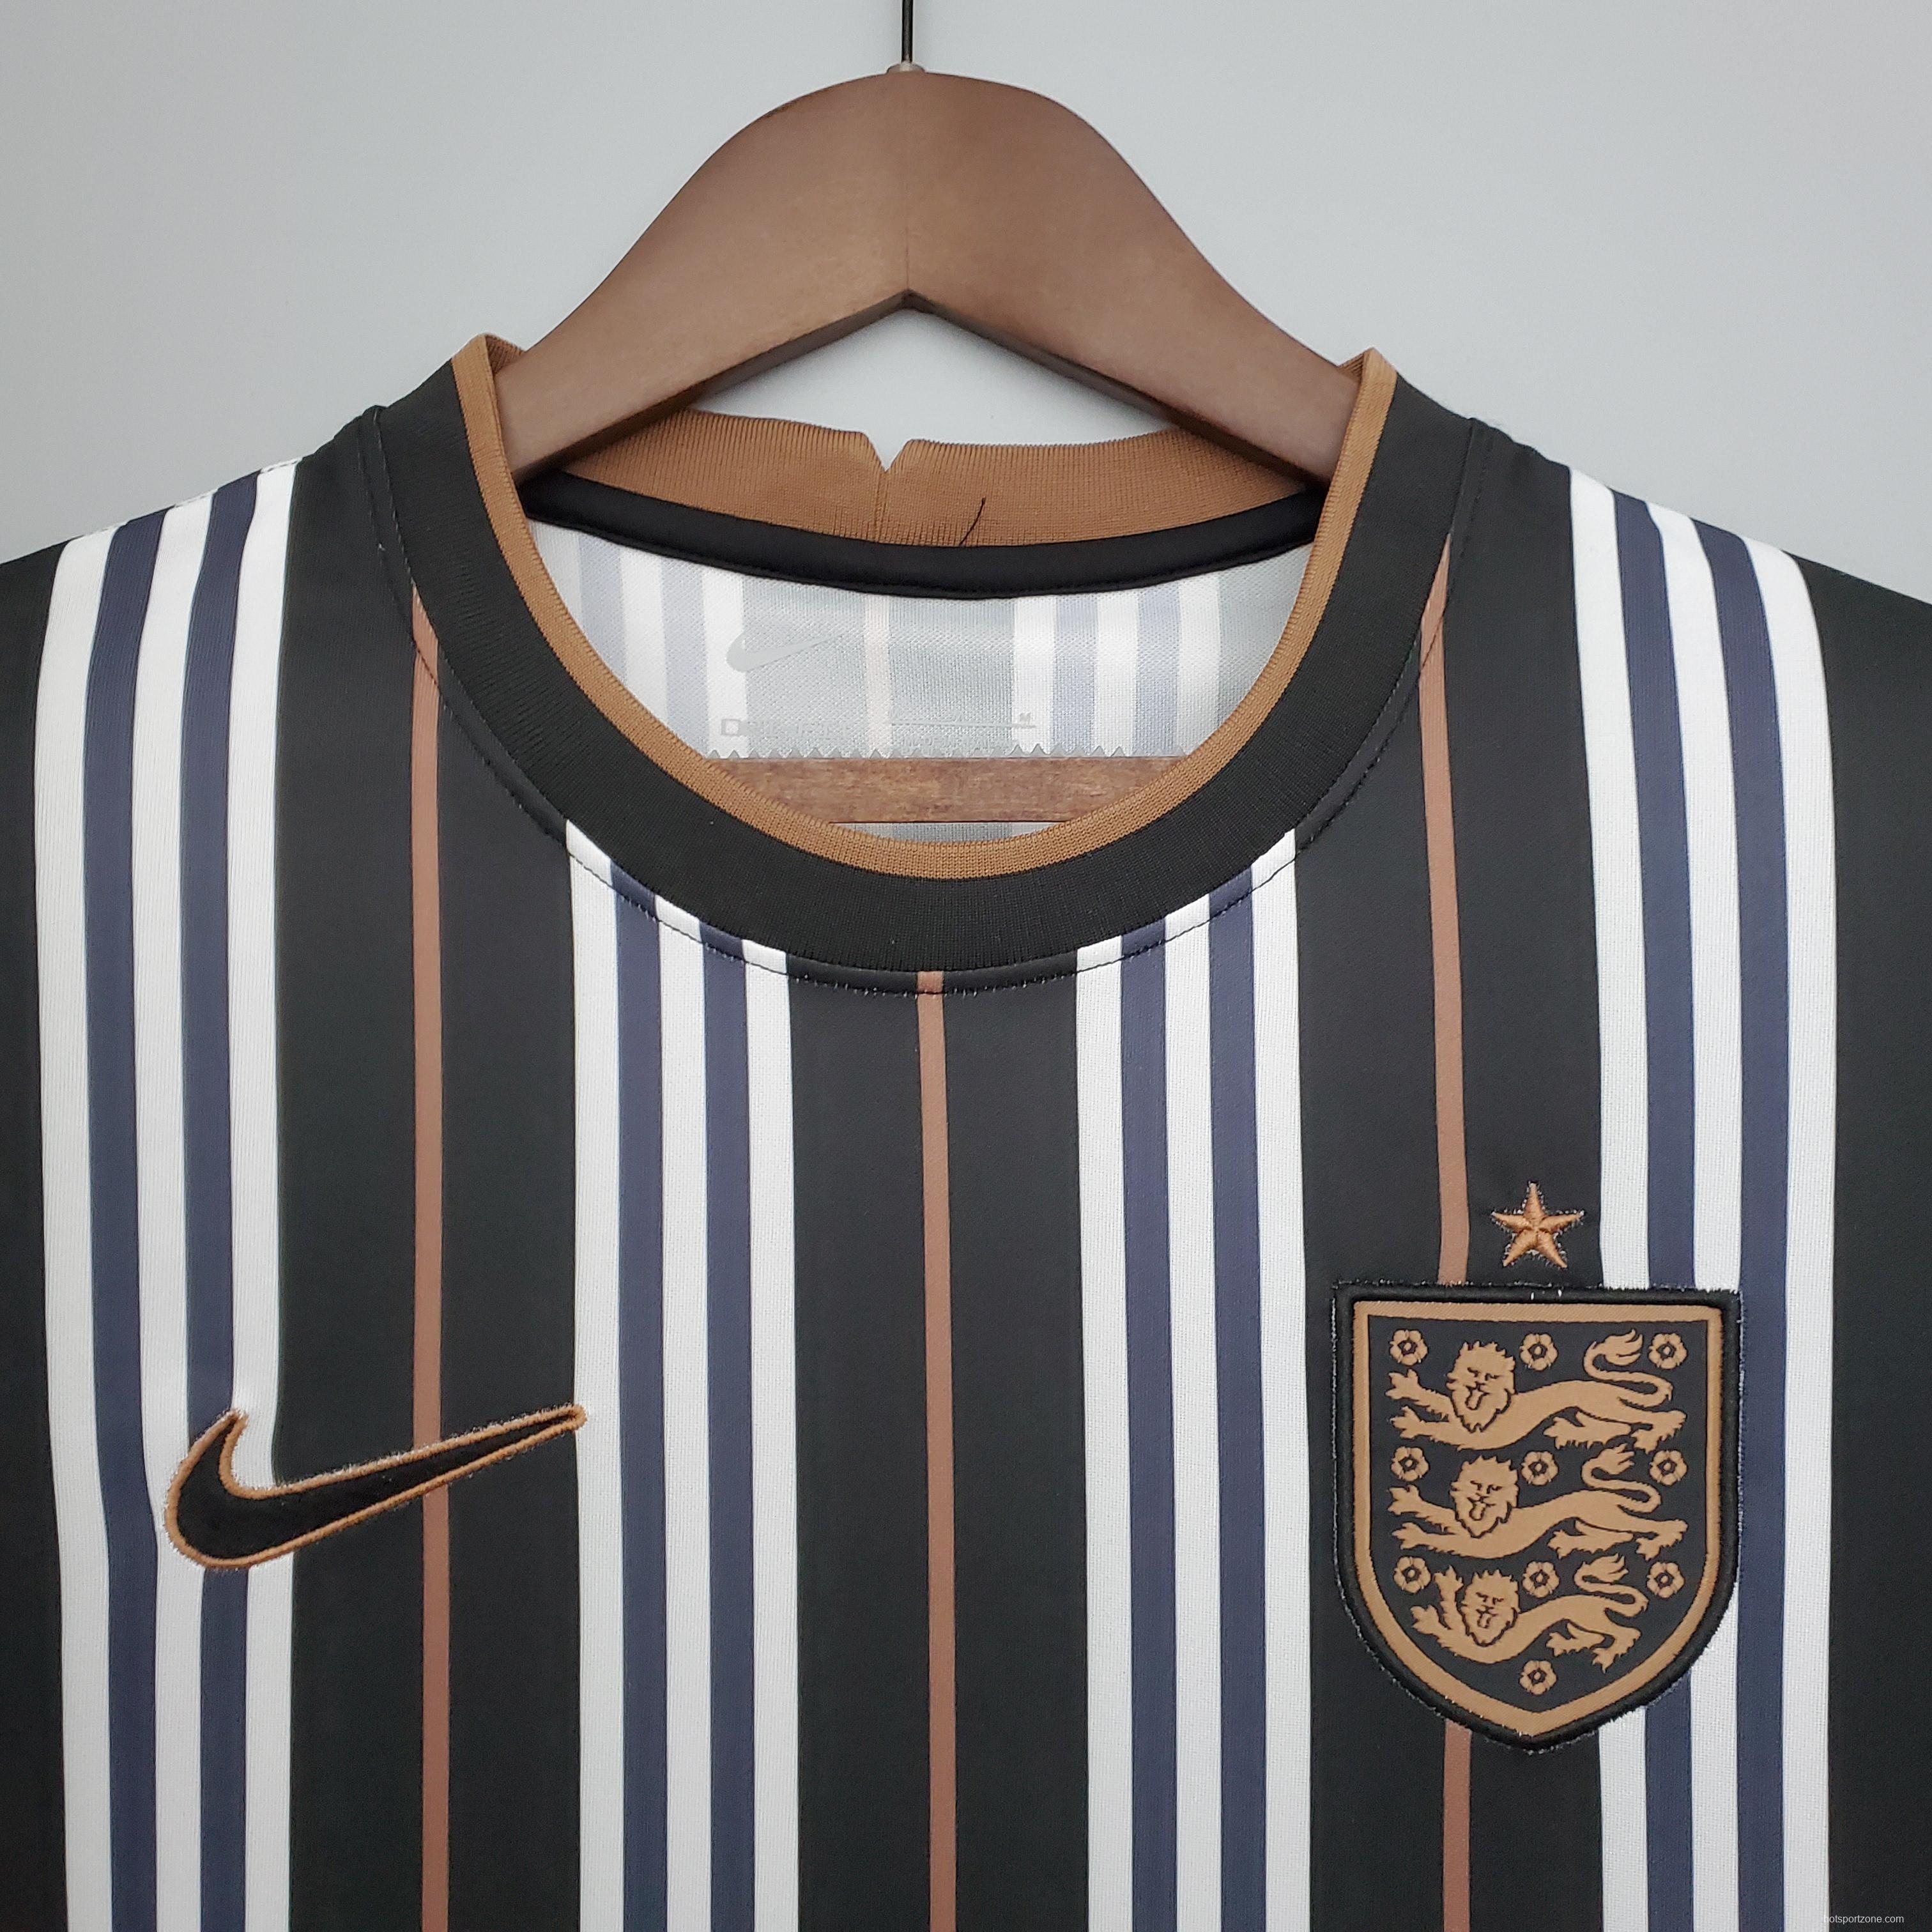 2021 England Special Edition Black and White Soccer Jersey